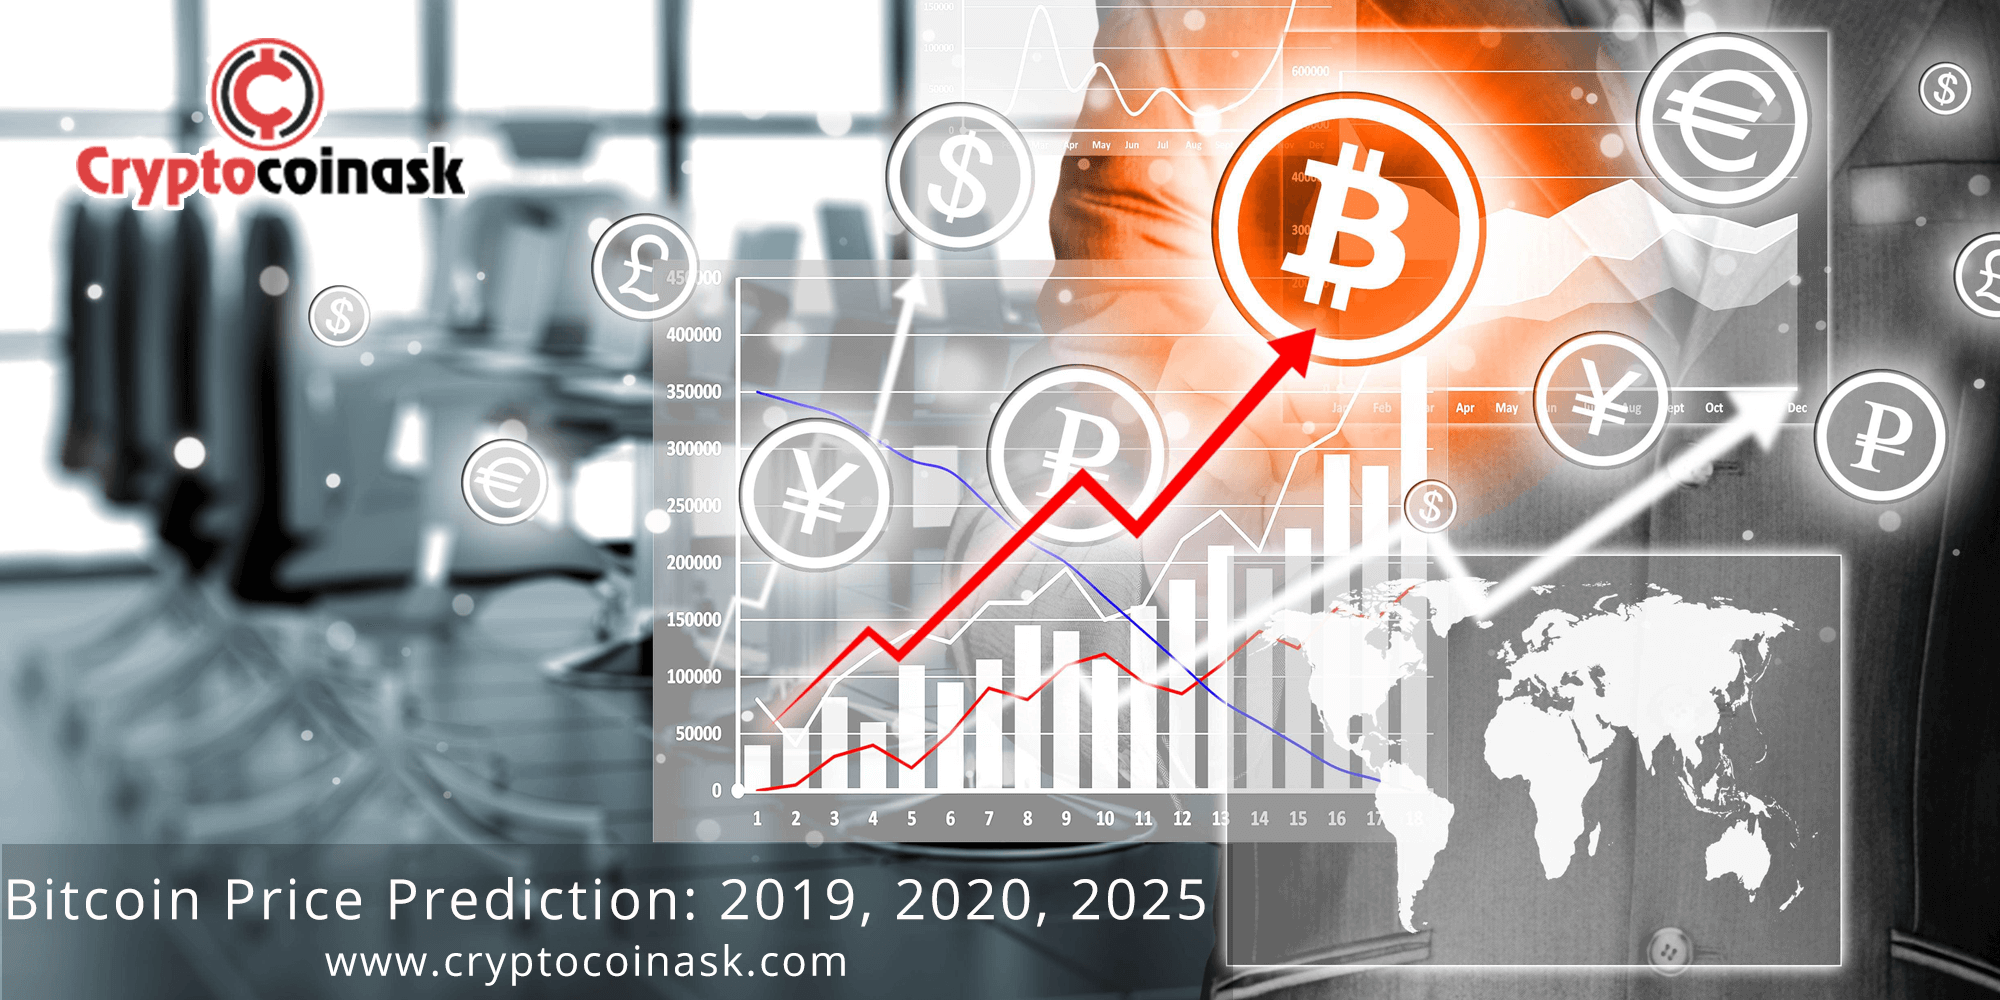 Bitcoin Price Prediction 2019 2020 2025 From Different Experts - bitcoin price prediction